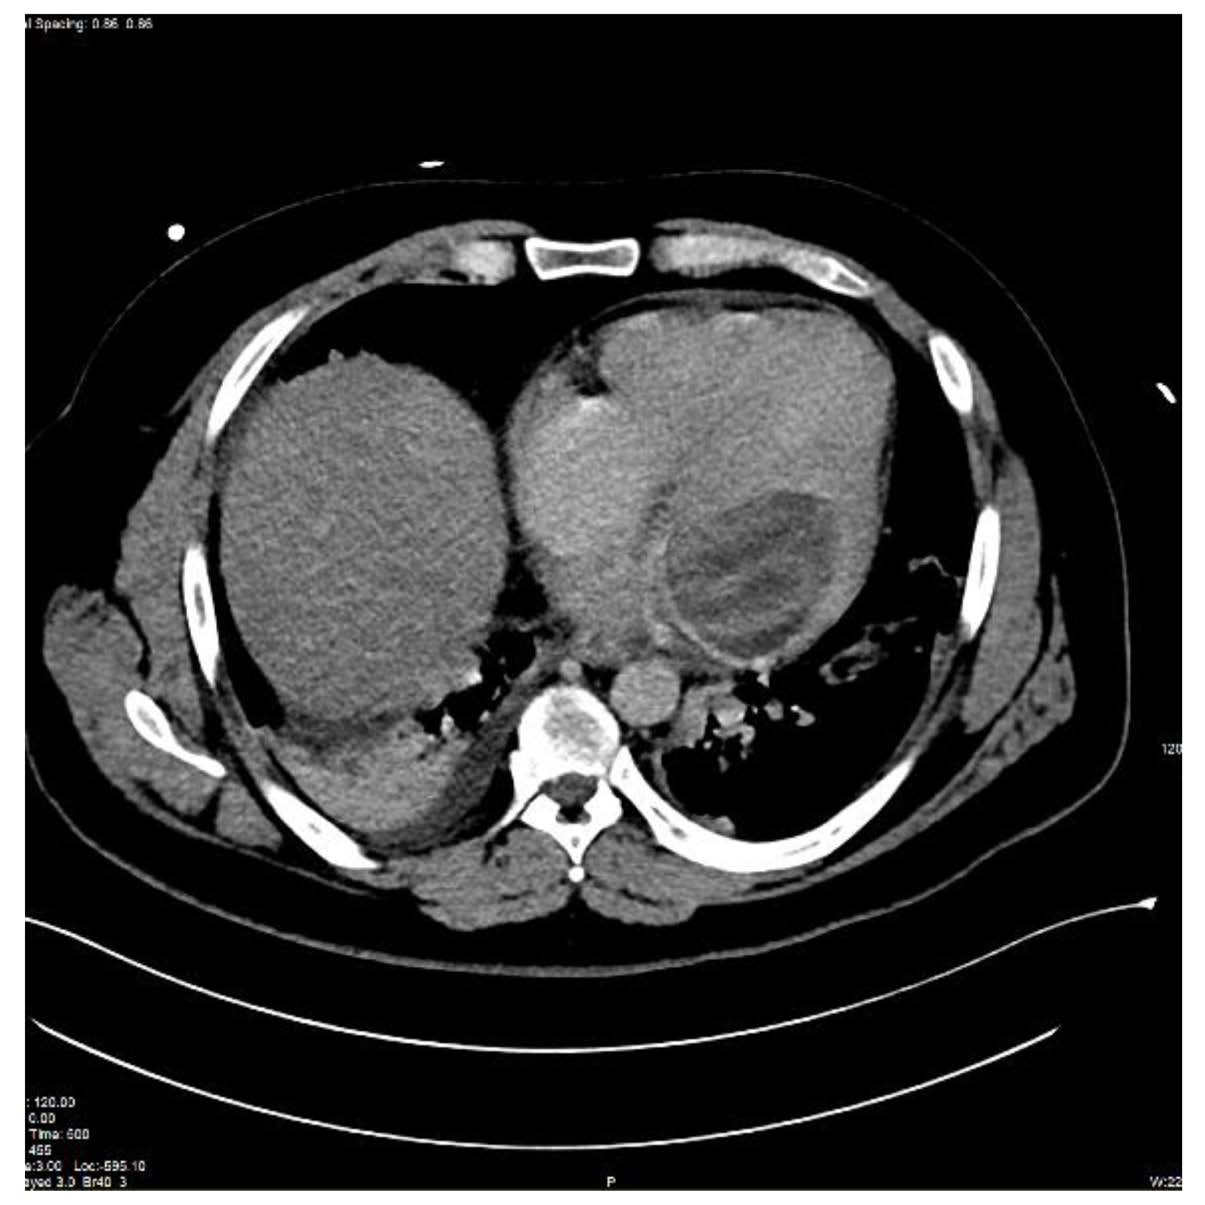 Contrast-enhanced computed tomography imaging of the chest